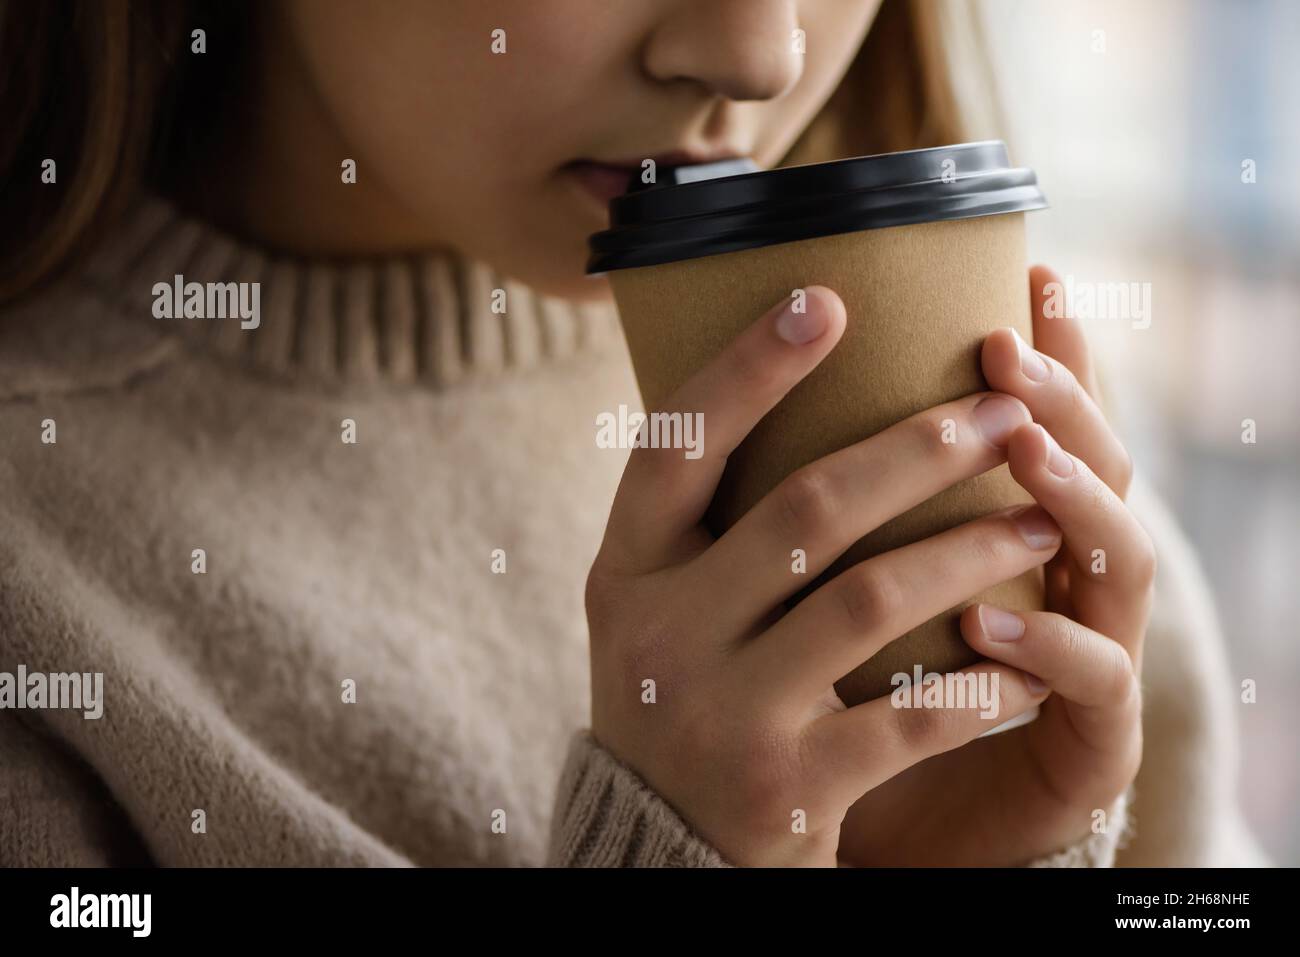 Girl is holding a paper cup with coffee. Stock Photo